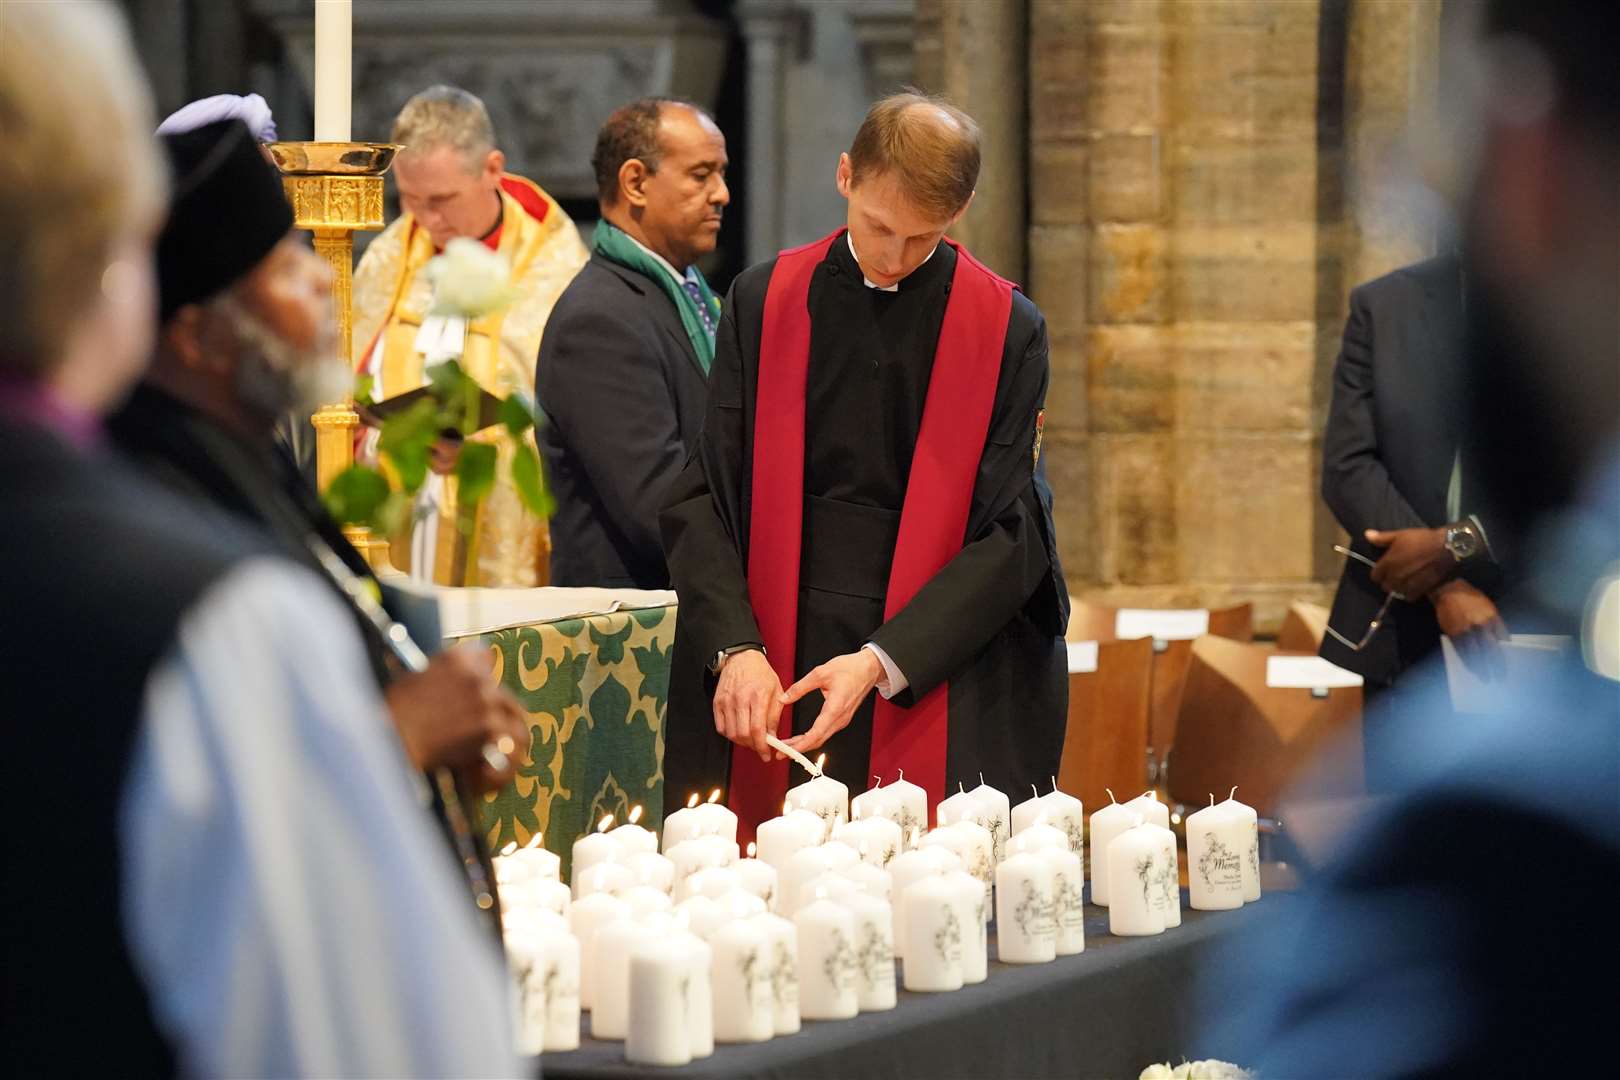 A member of the clergy lights candles with the names of the Grenfell victims on them (Jonathan Brady/PA)